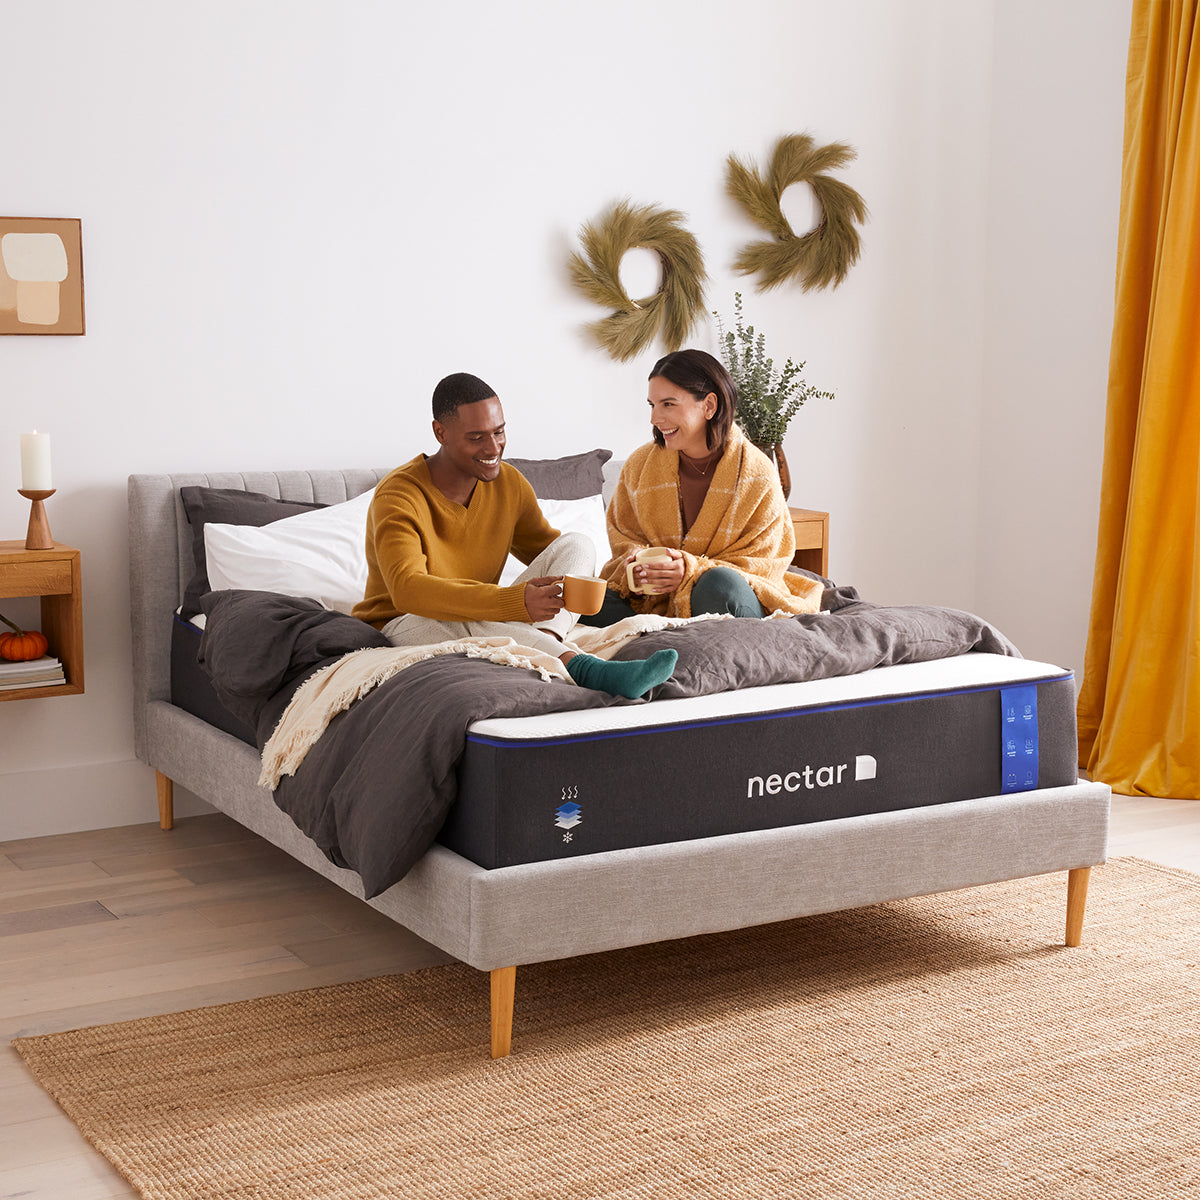 Couple Relaxing On Nectar Classic 4.0 Mattress